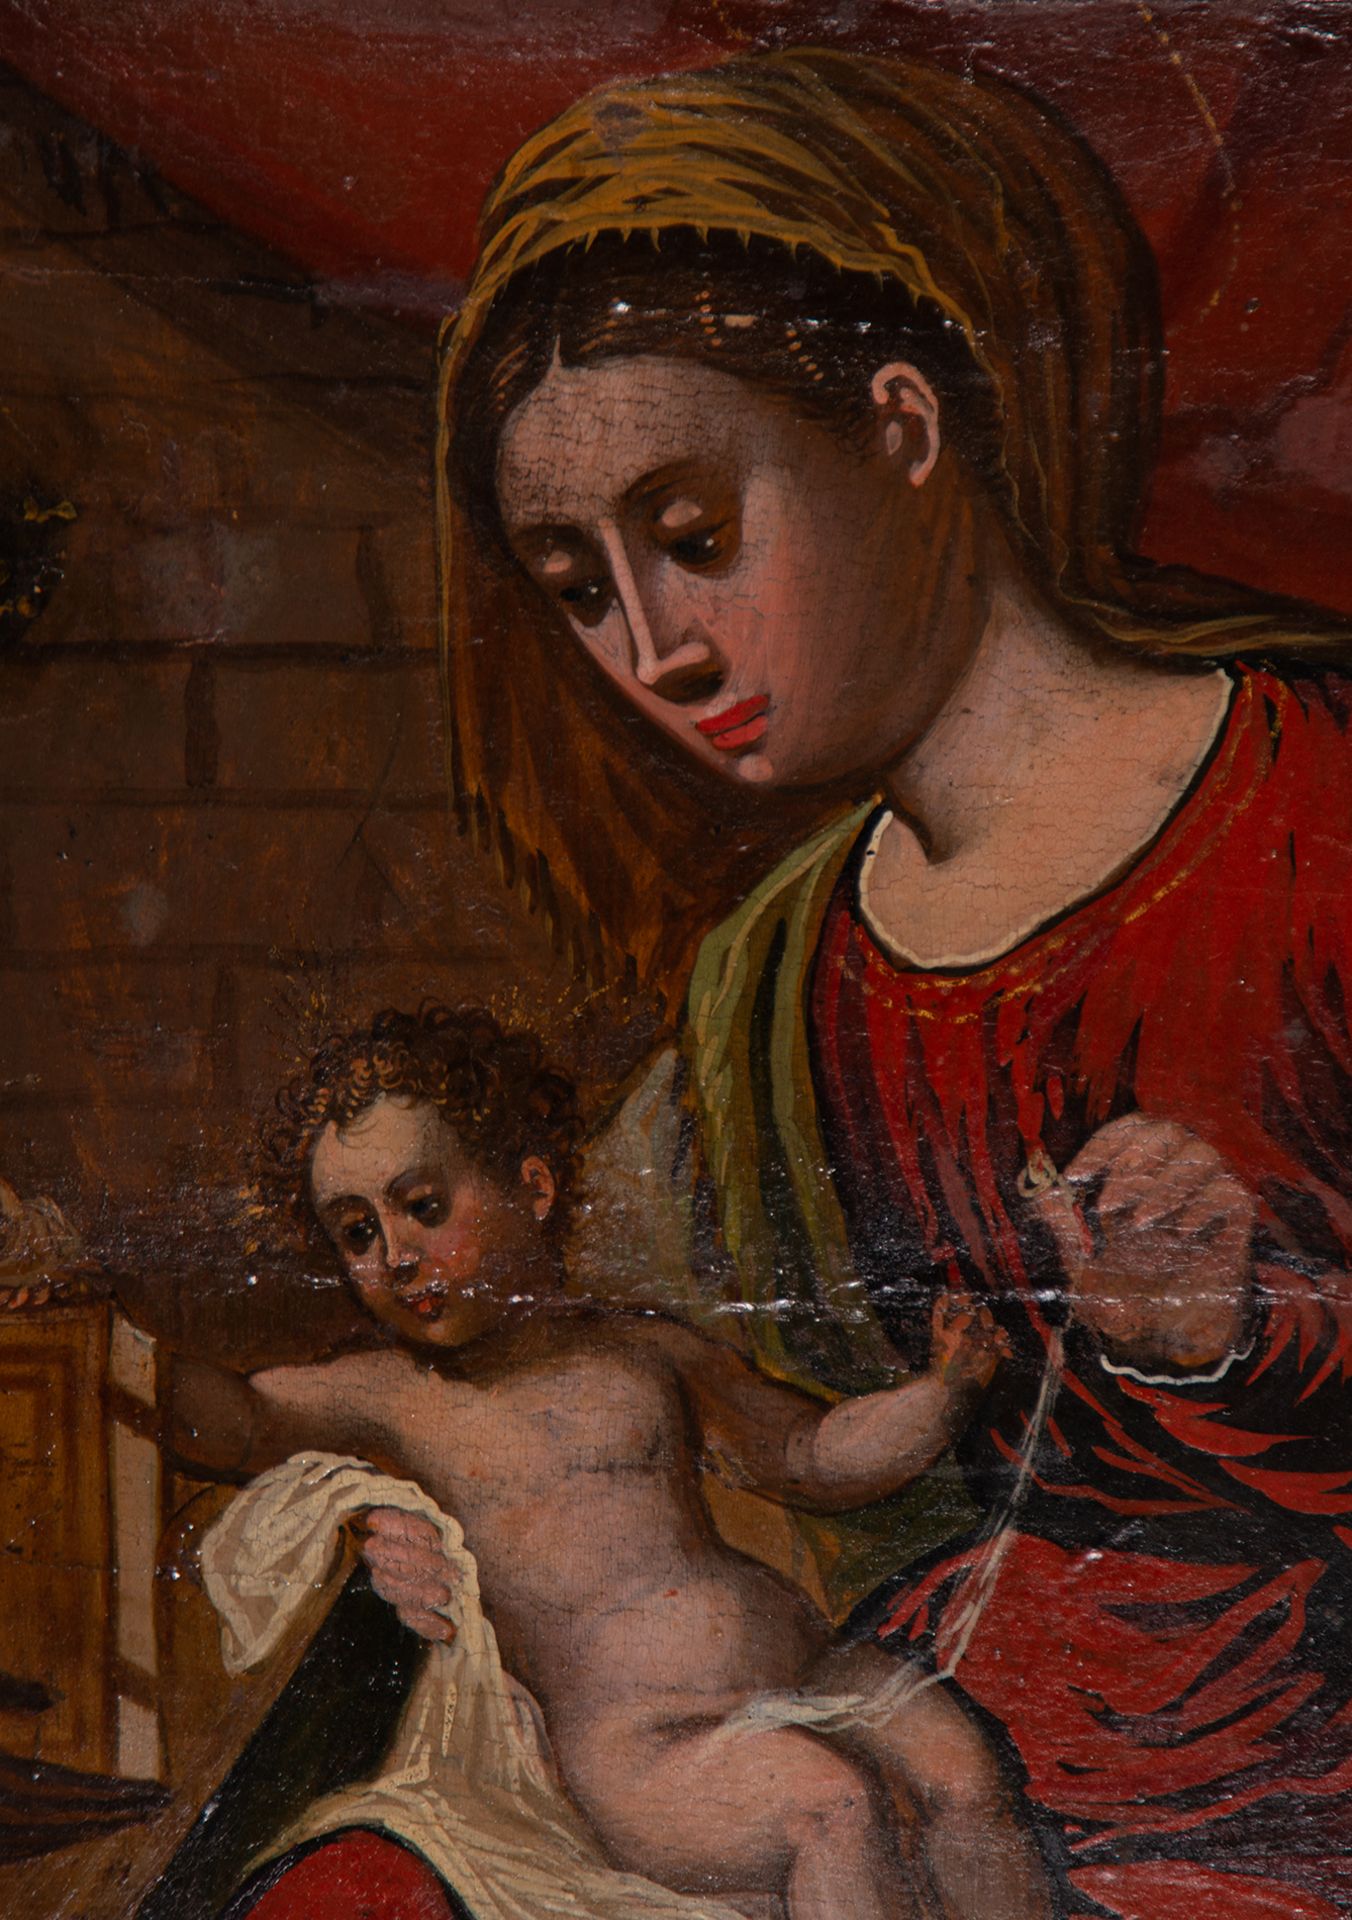 Presentation of the Child Jesus in the Temple, Italian school of the 16th century - Image 3 of 8